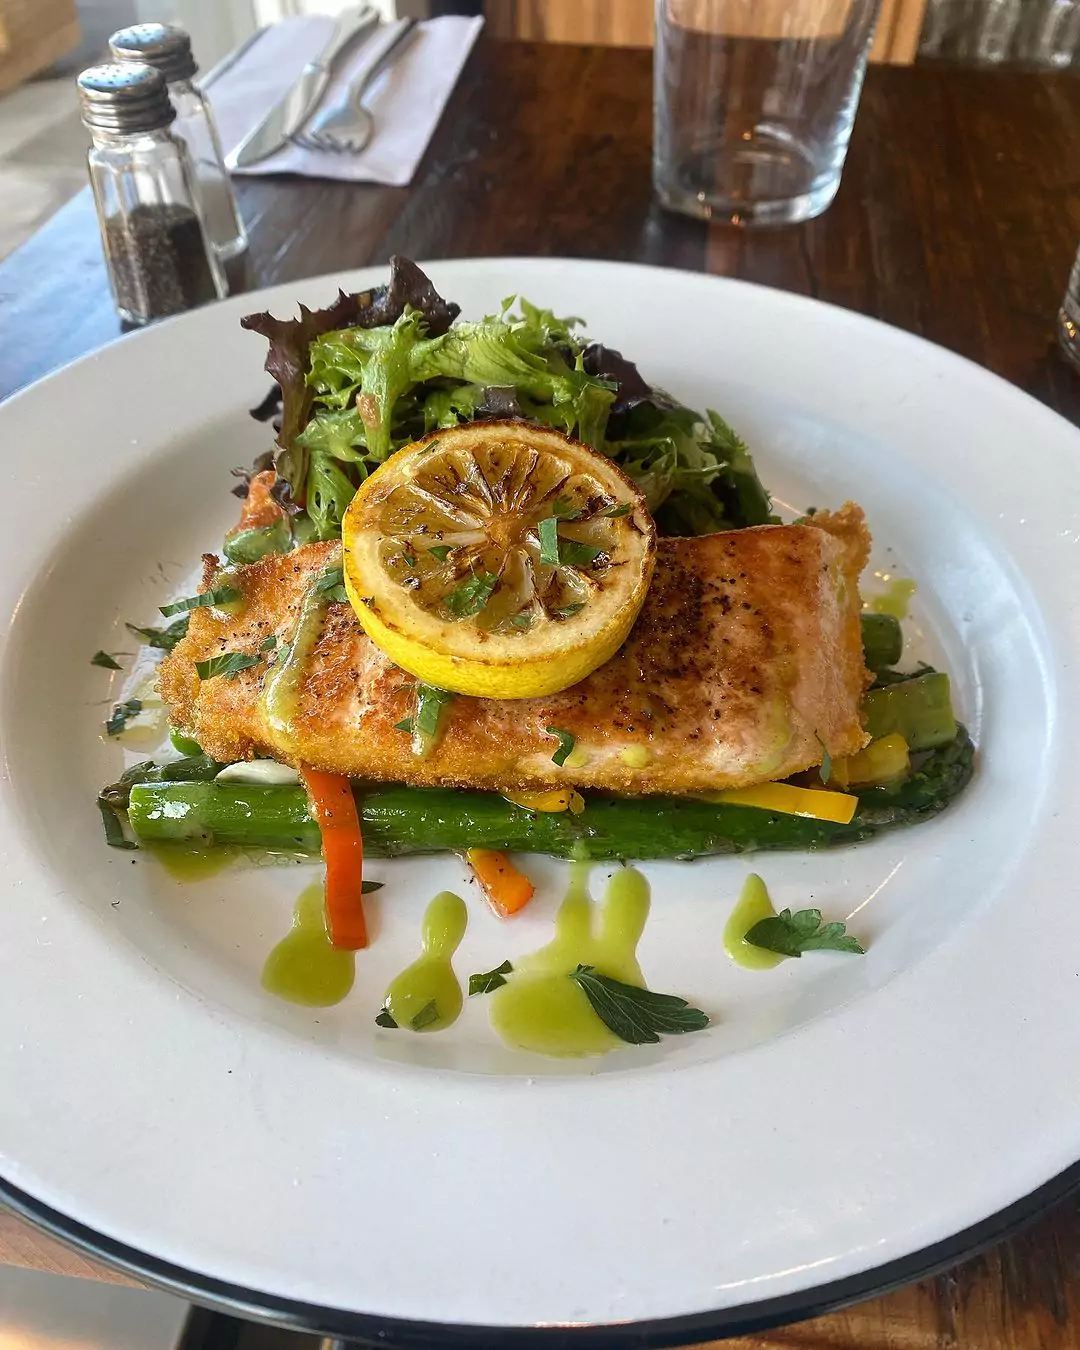 Plate of roasted salmon topped with grilled lemon half and served atop asparagus with a green sauce and side mixed green salad